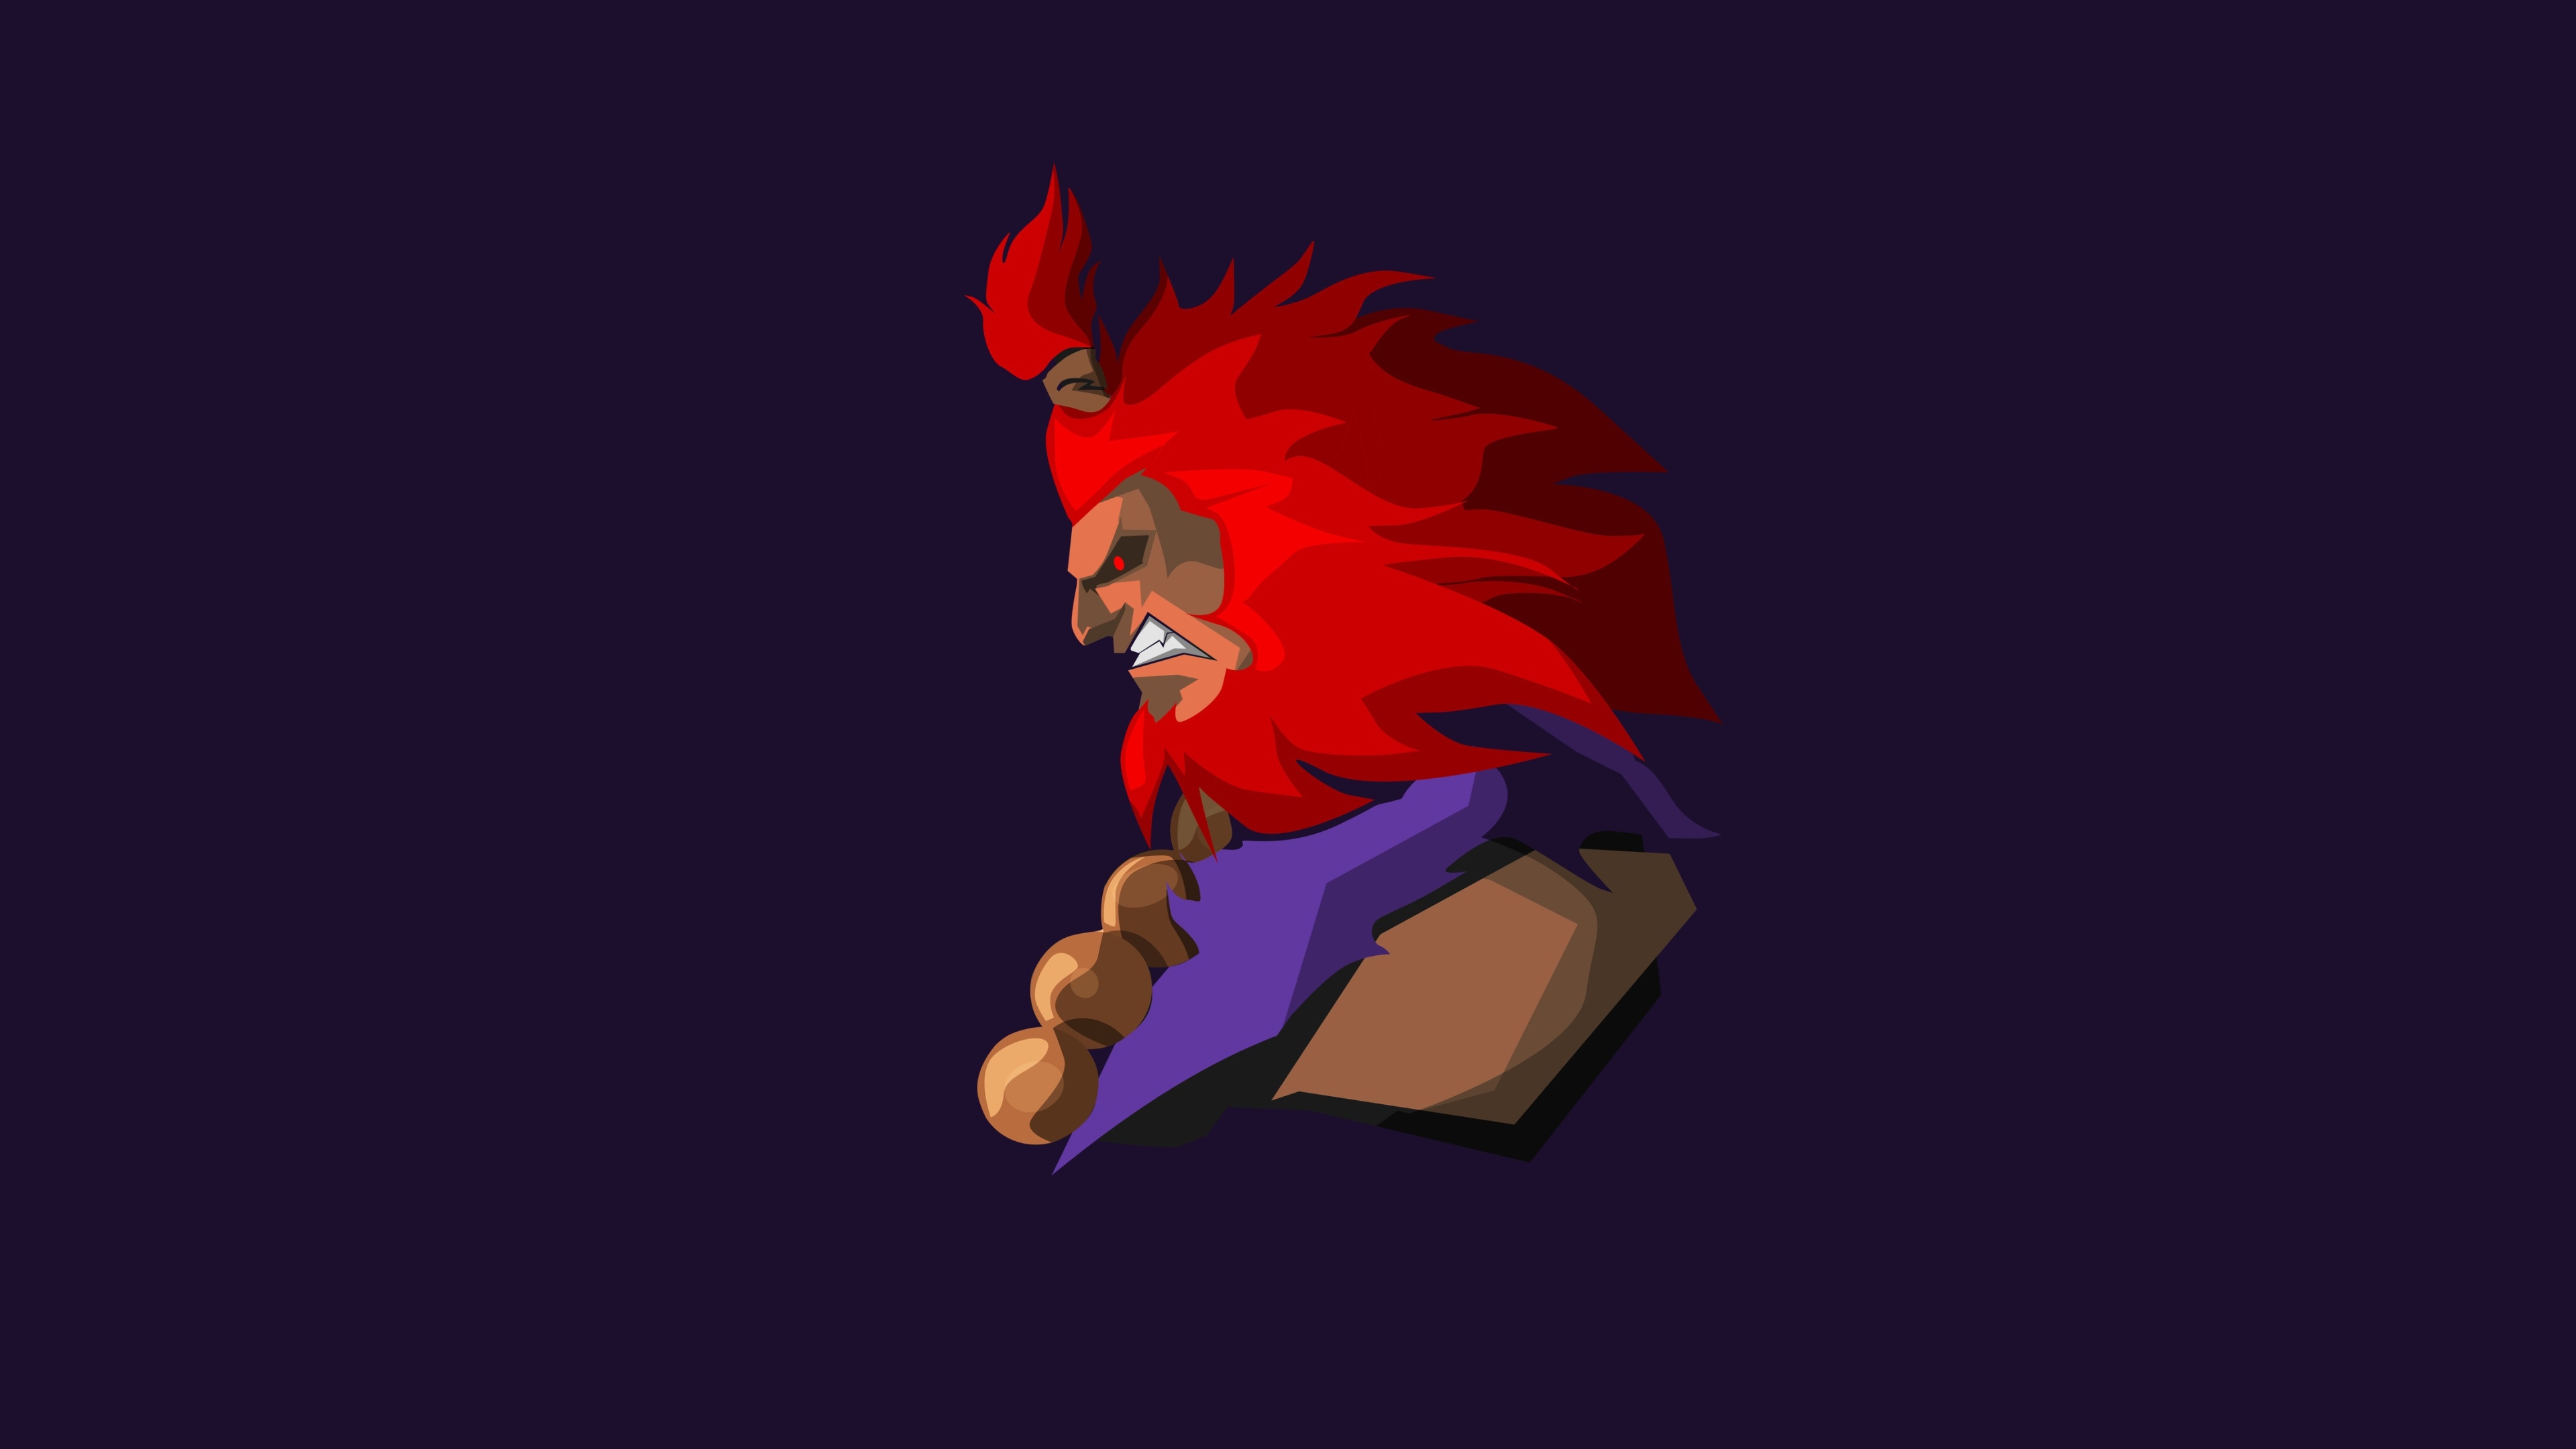 3840x2160 Akuma Street Fighter Minimal 4k Wallpaper Hd Games 4k Wallpapers Images Photos And Background